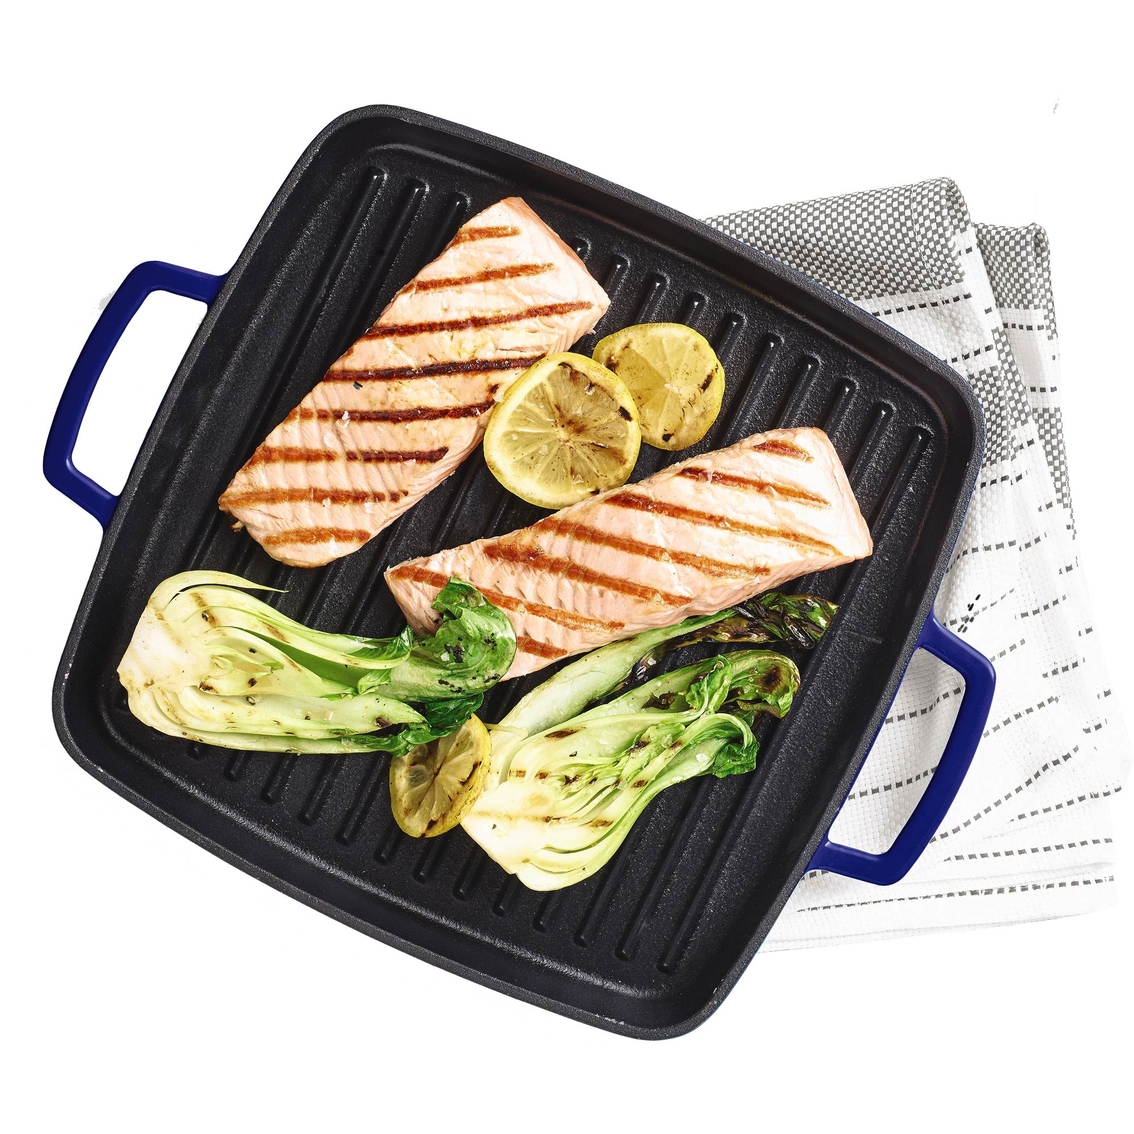 Martha Stewart Collection 11 In. Enameled Cast Iron Grill Pan - Image 2 of 2